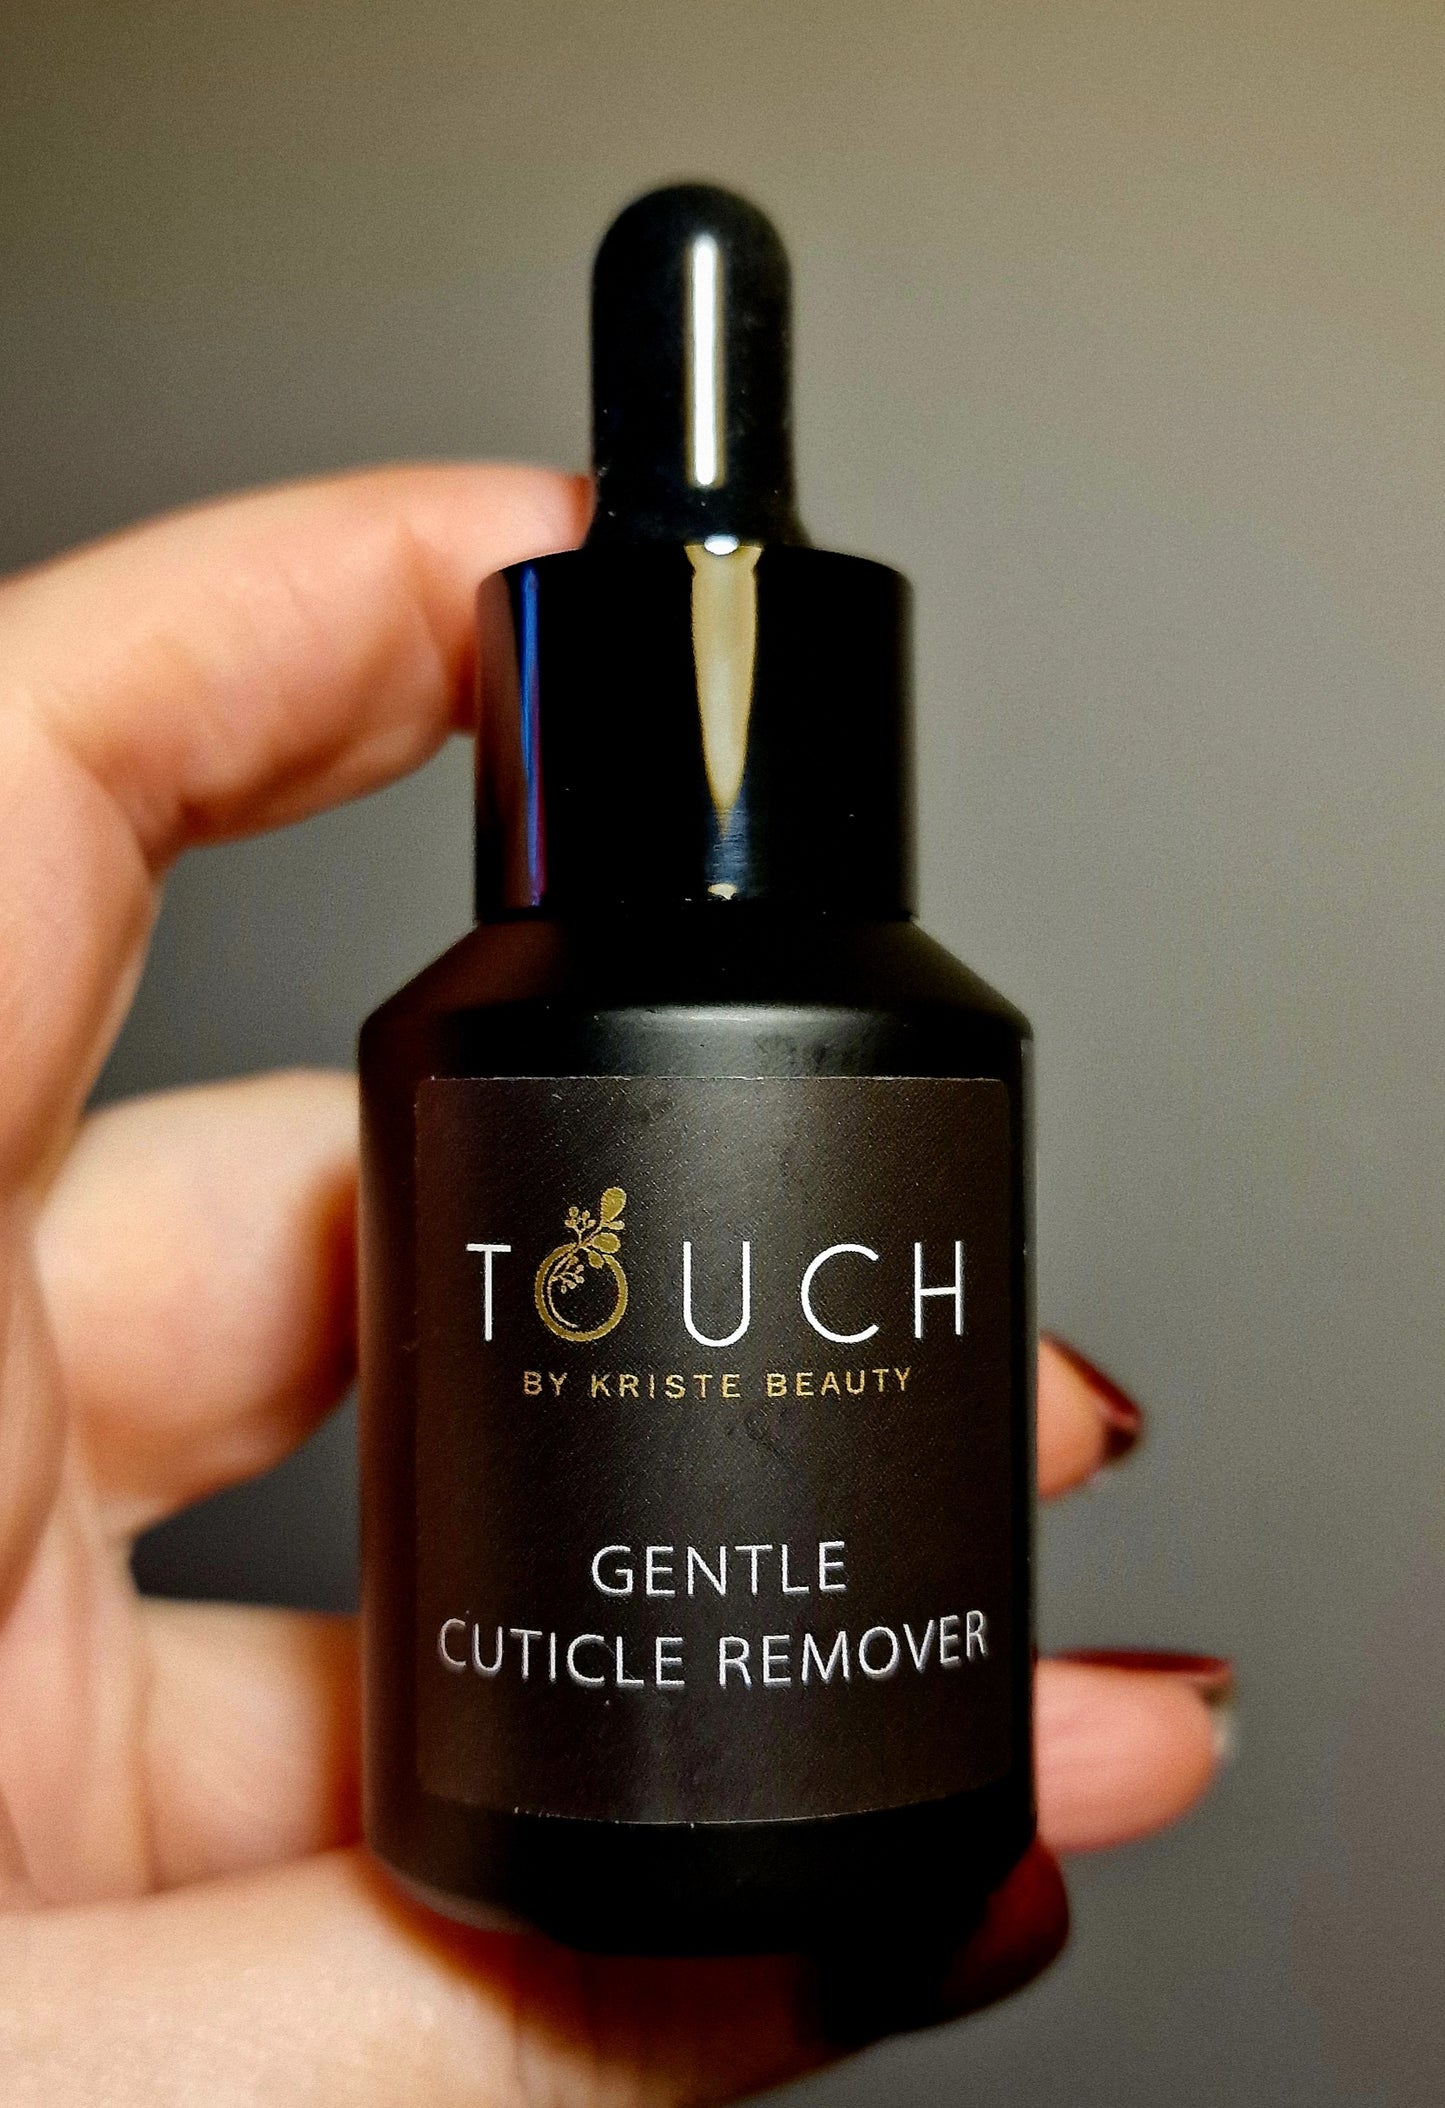 TOUCH BY KRISTE BEAUTY cuticle remover